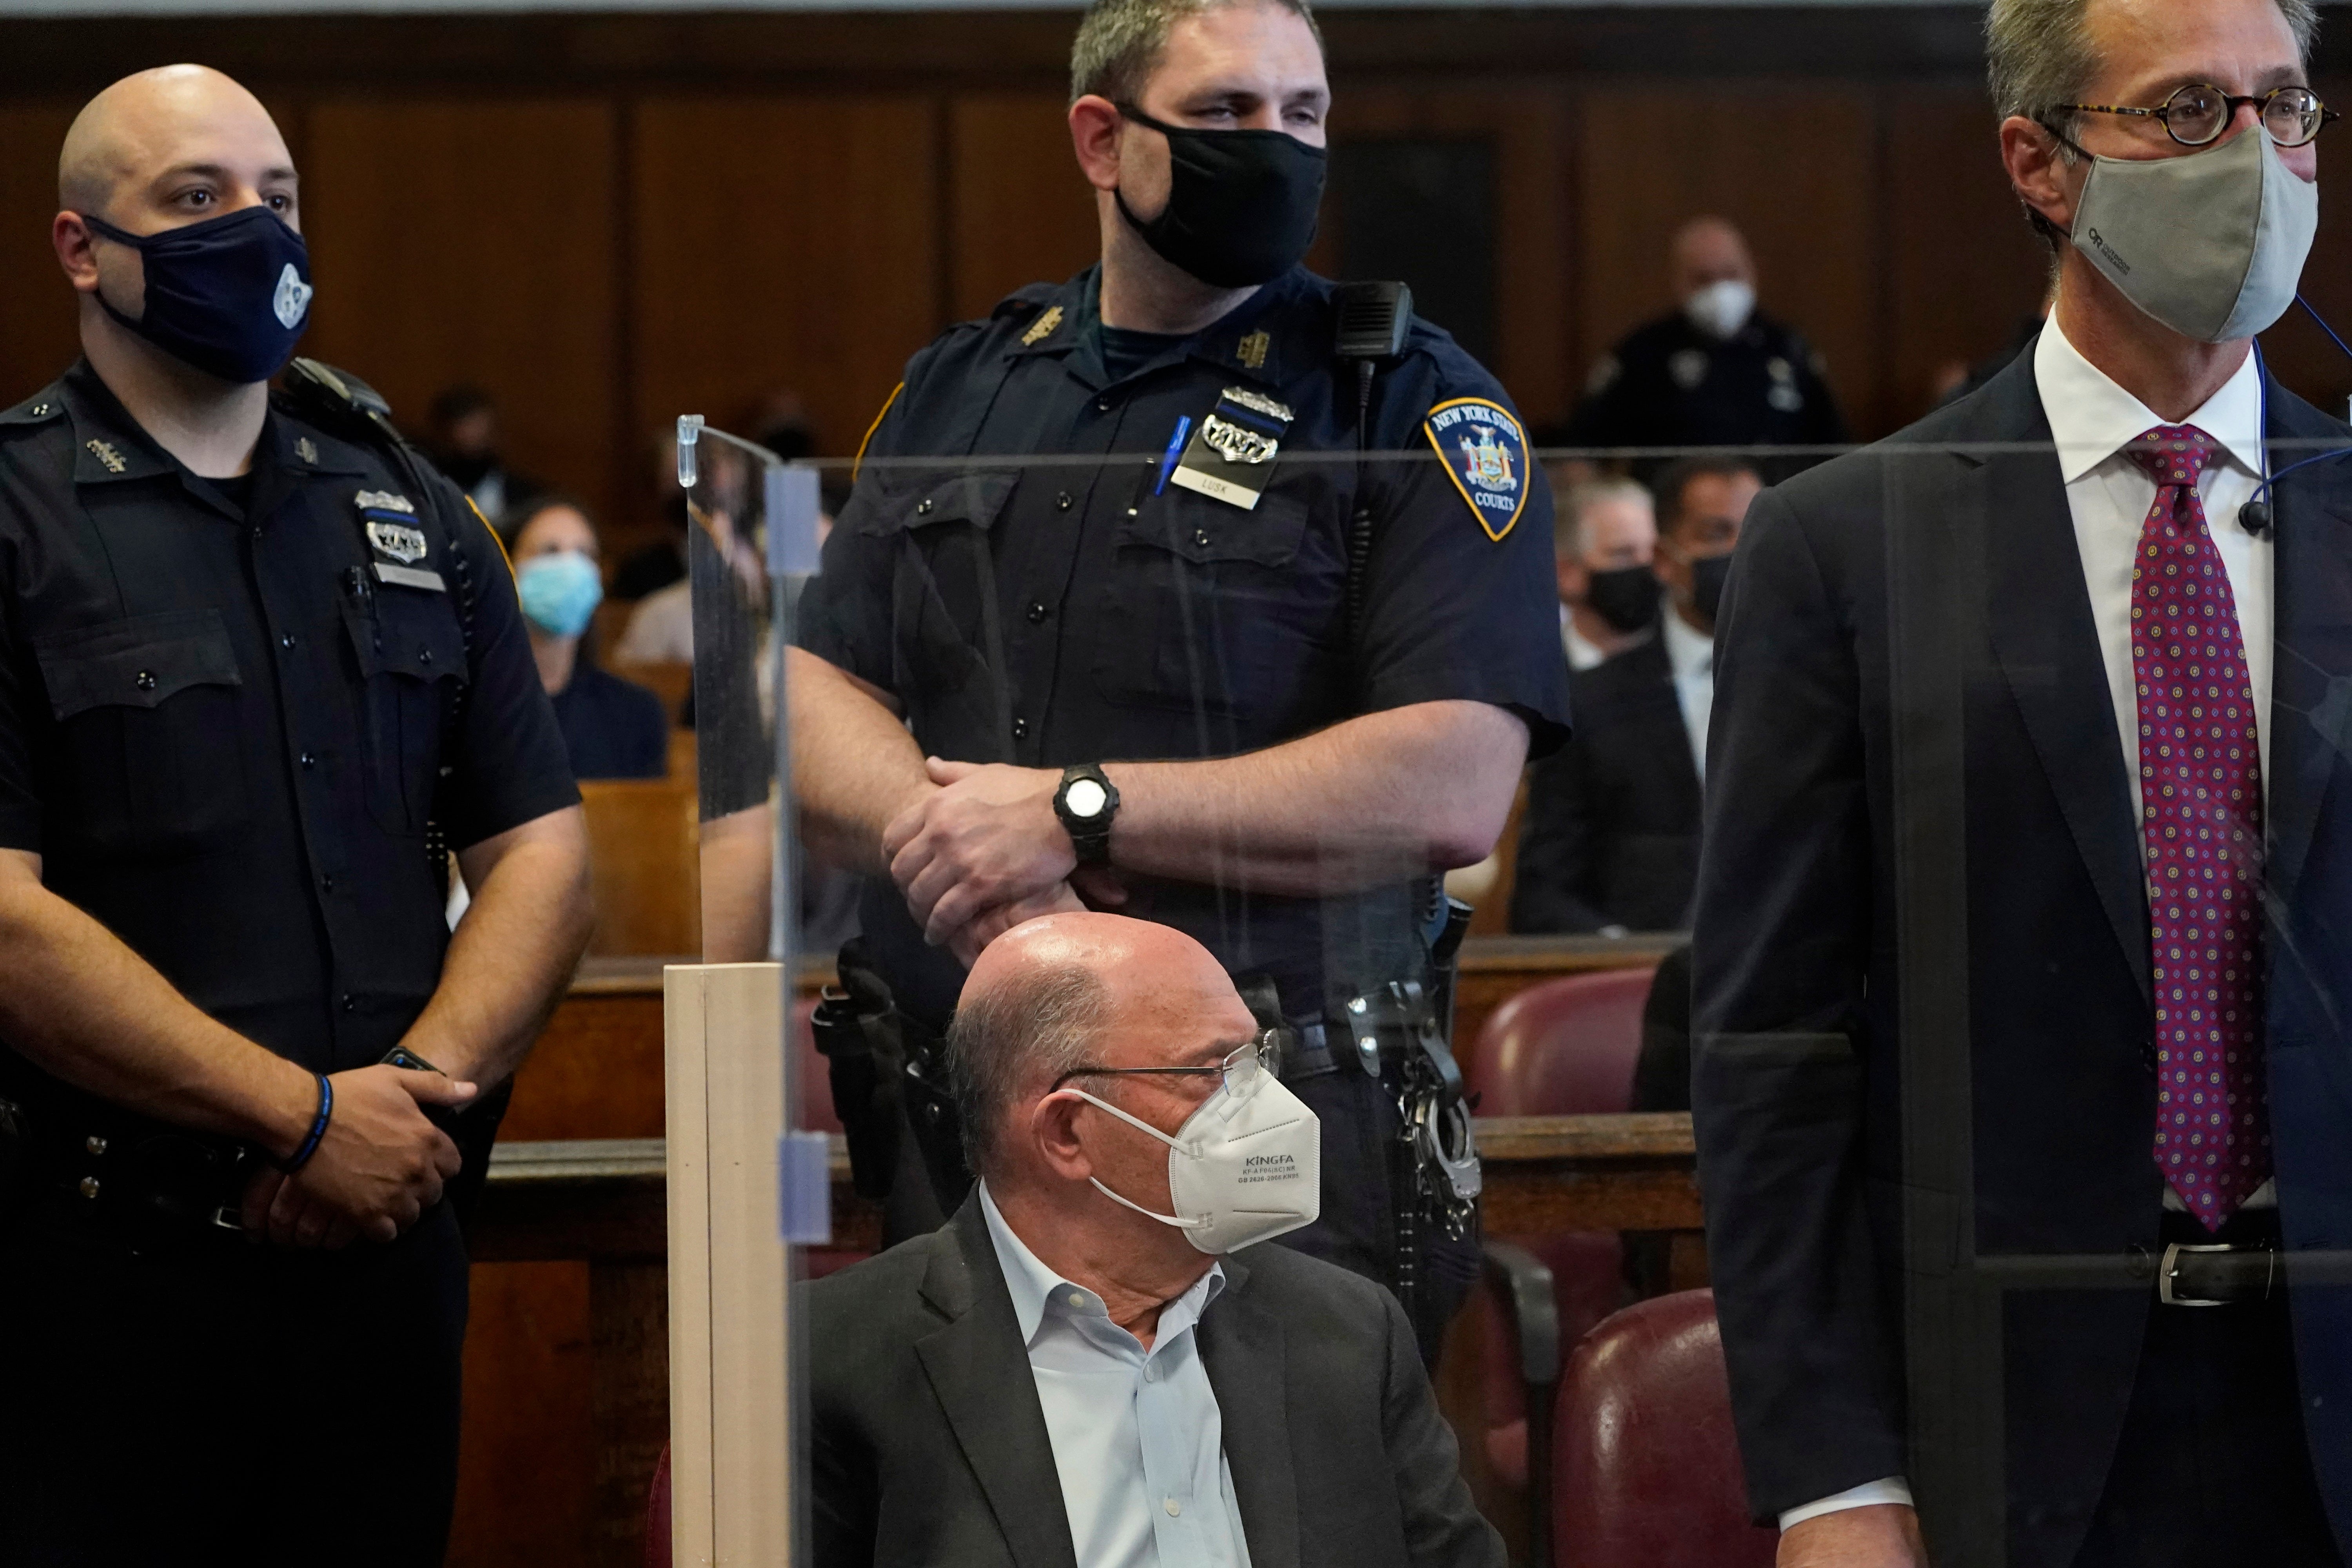 The Trump Organization’s Chief Financial Officer Allen Weisselberg appears in court in New York, Thursday, July 1, 2021. Weisselberg was arraigned a day after a grand jury returned an indictment charging him and Trump’s company with tax crimes. Trump himself was not charged.